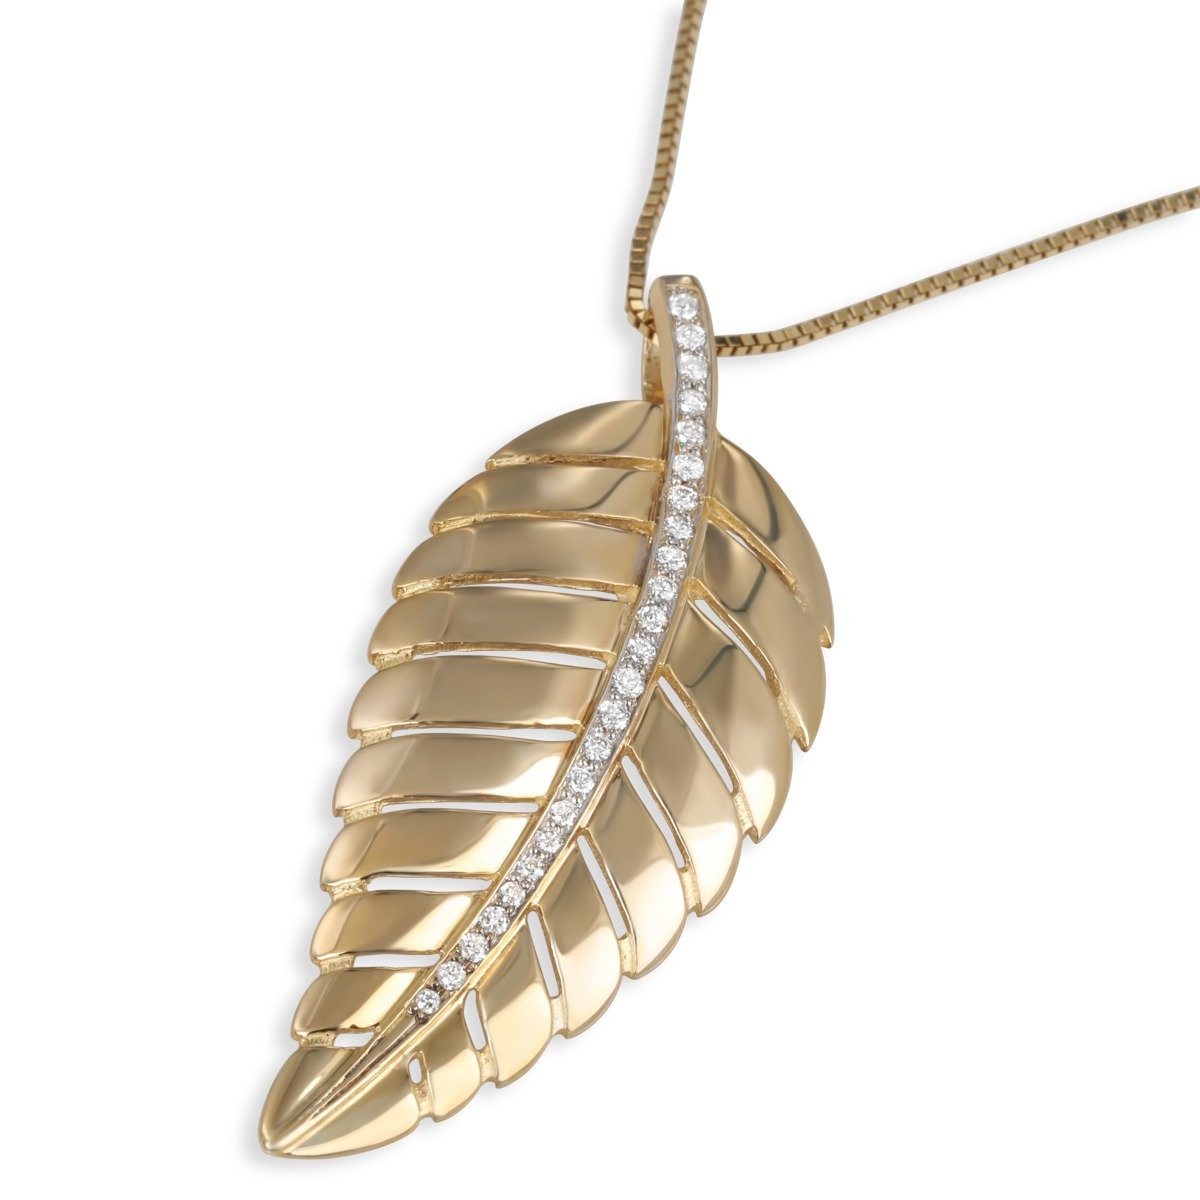 Anbinder 14K Yellow Gold and Diamond Contemporary Palm Leaf Pendant  - 1